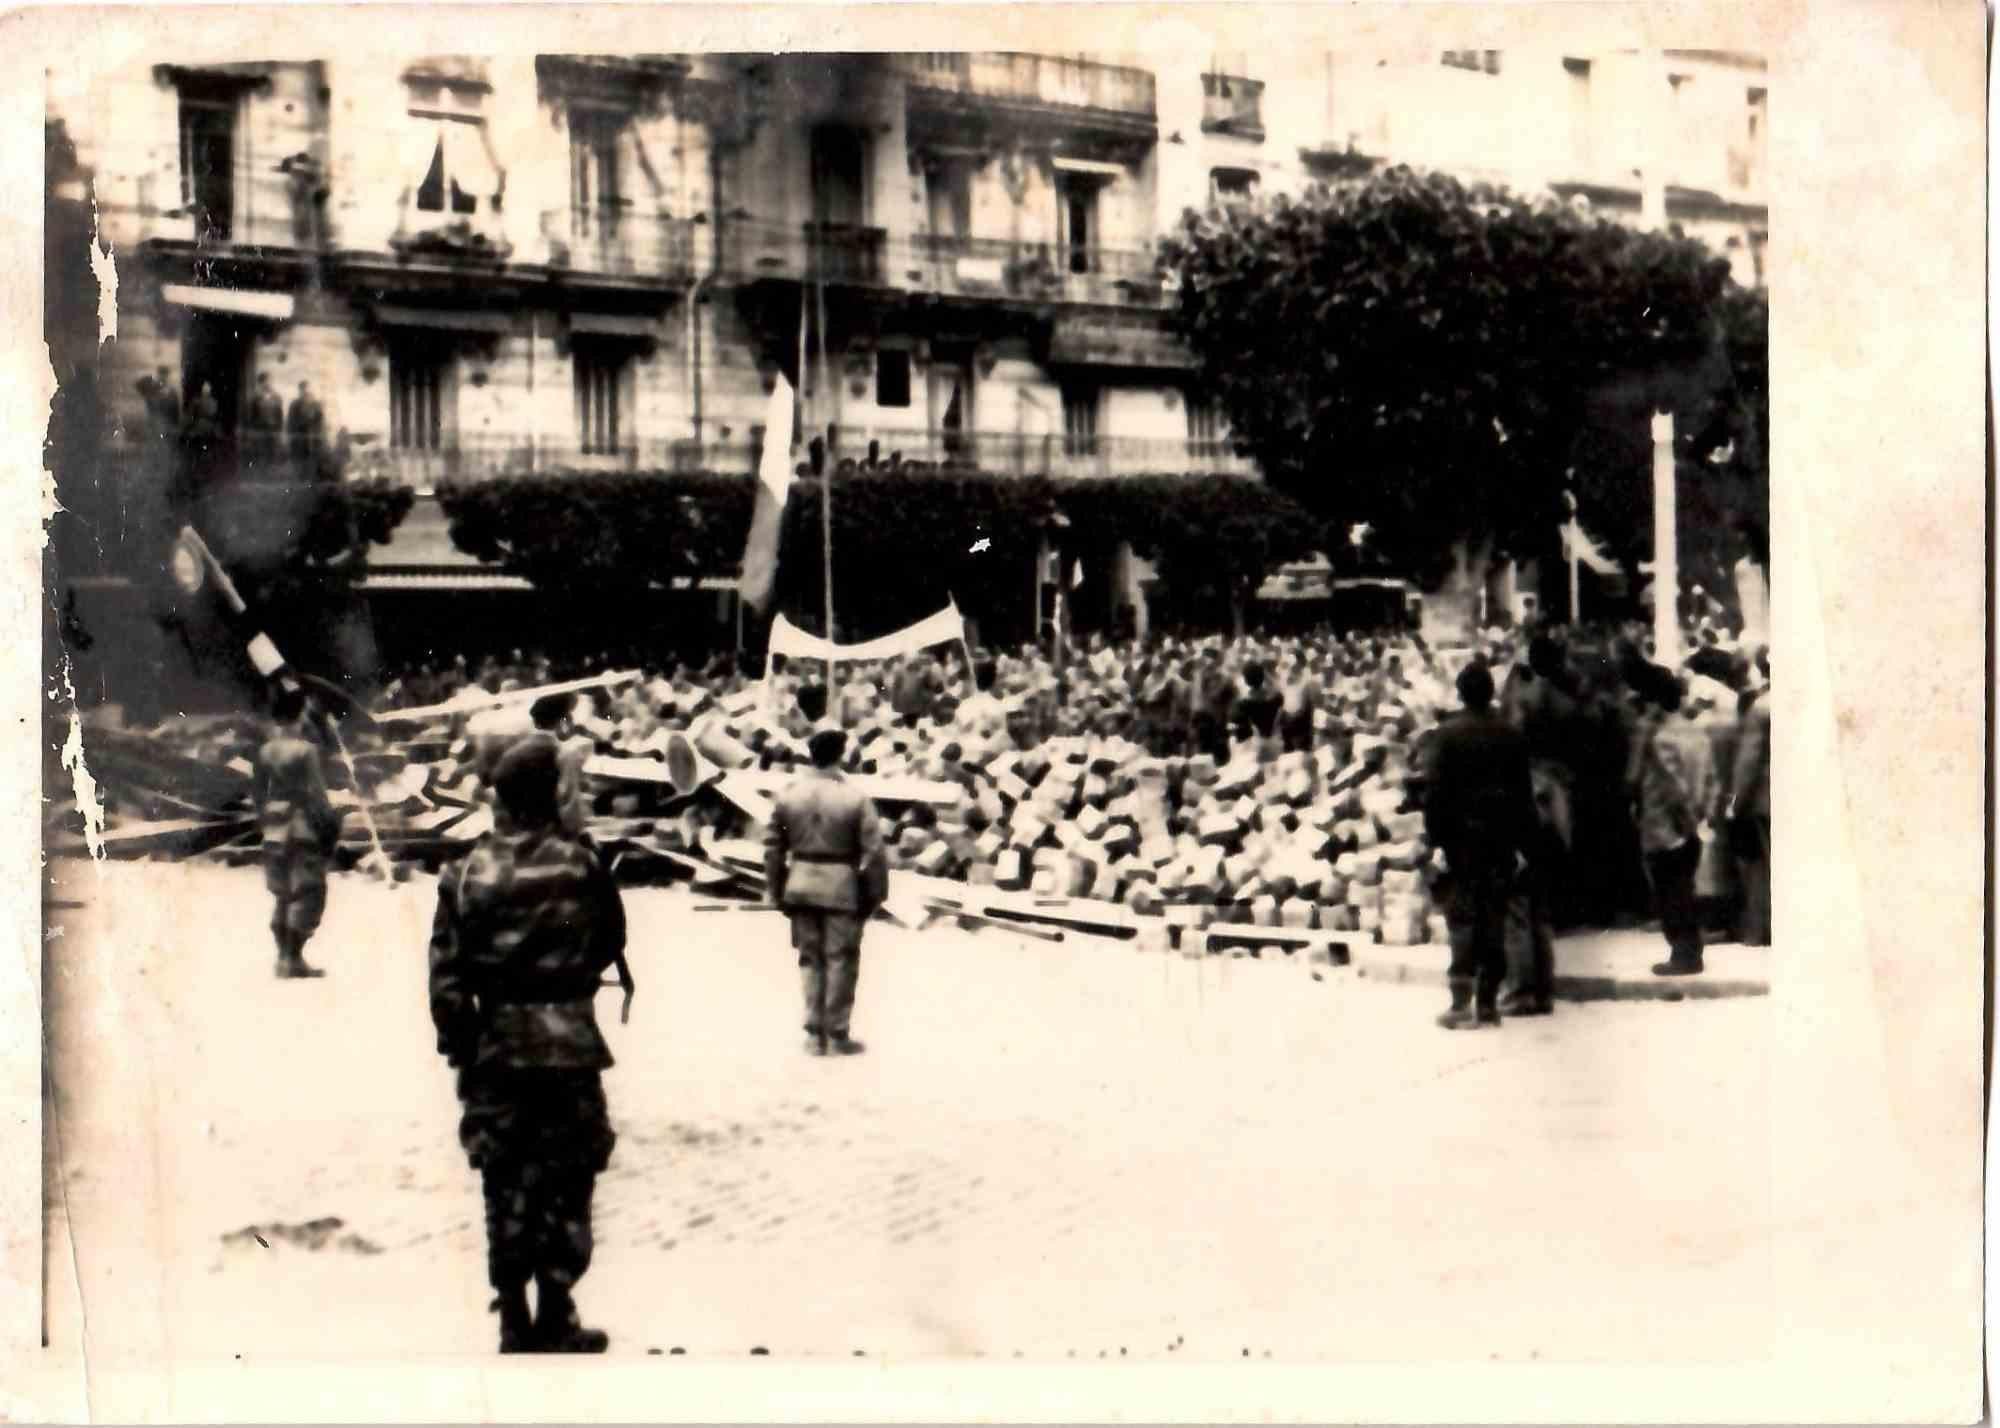 Unknown Black and White Photograph - Military in Algeria - Original Vintage Photograph - Mid-20th Century